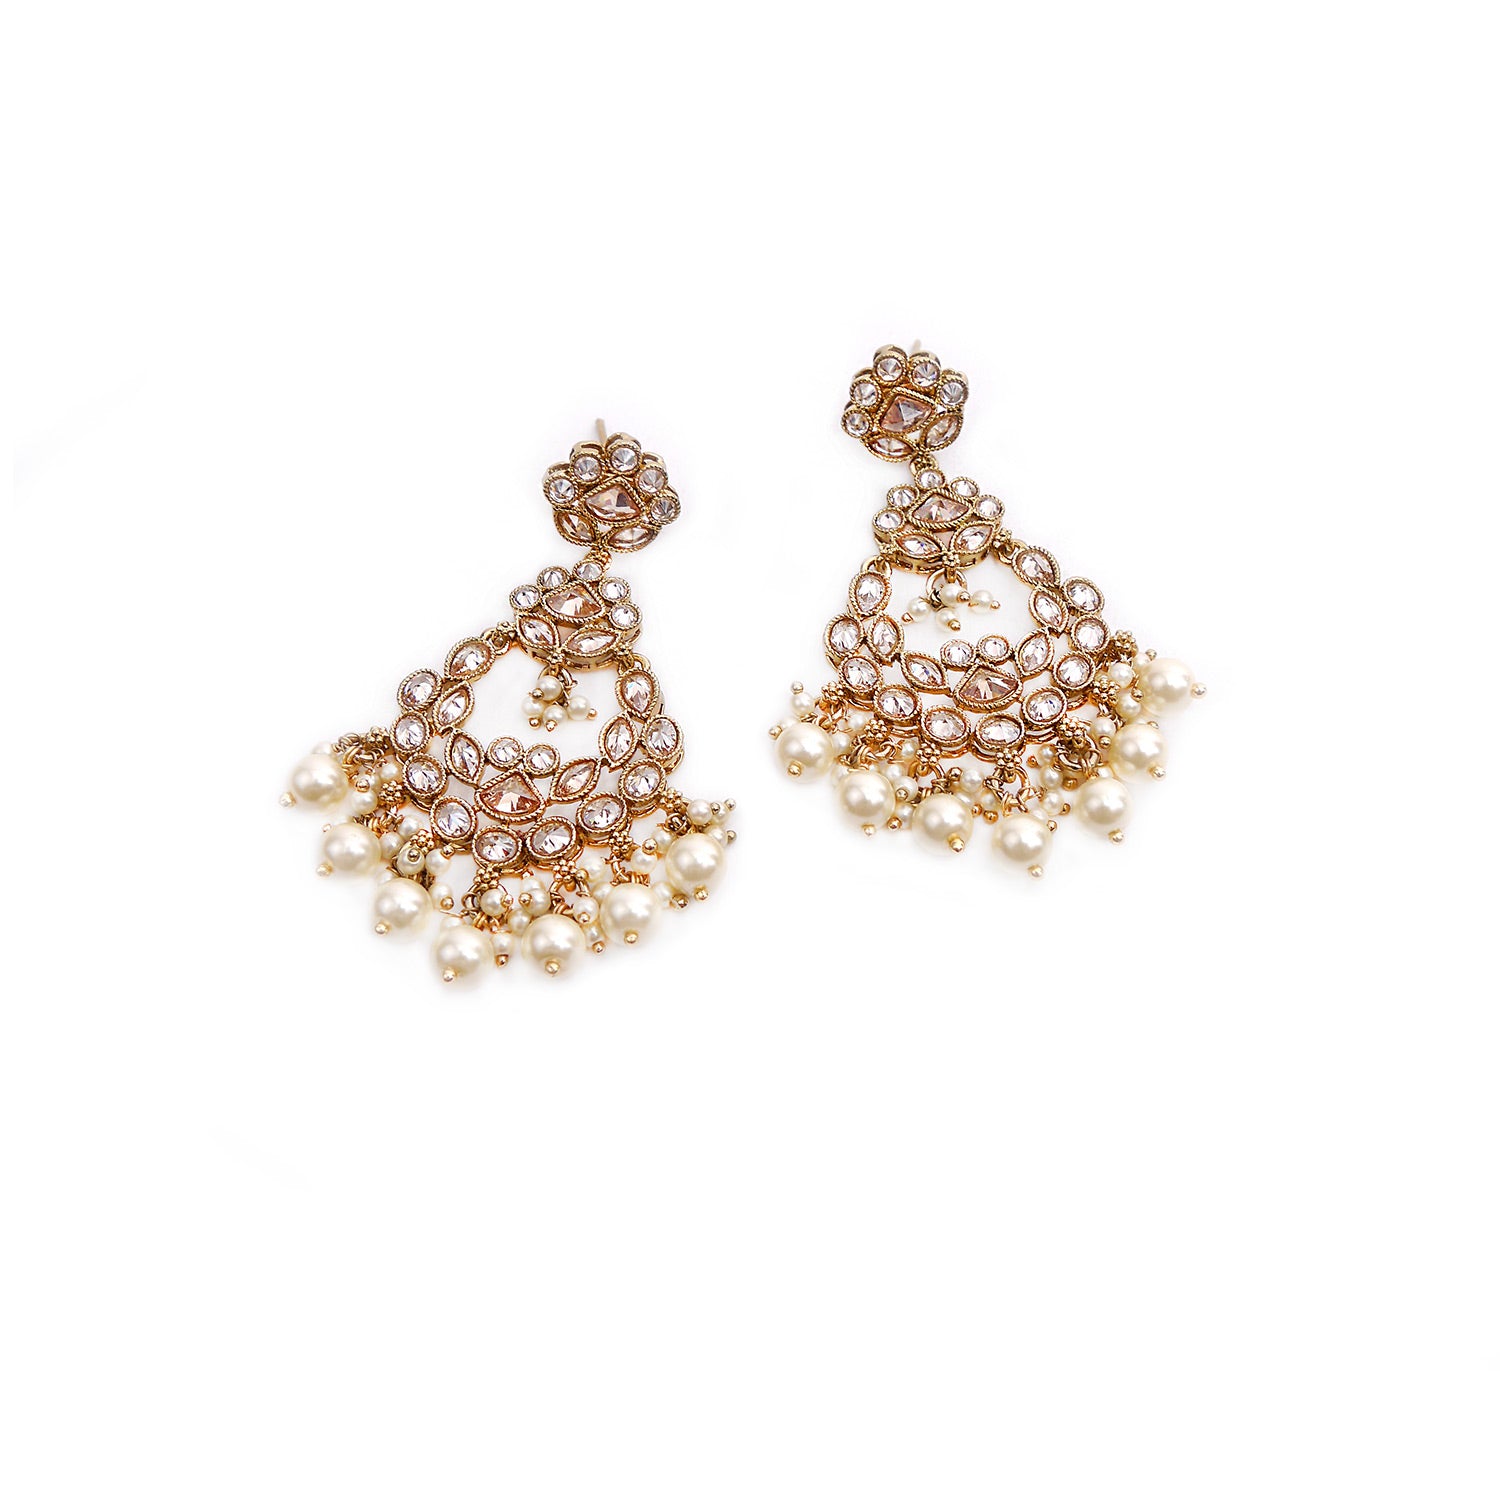 Willow Antique Pearl Earrings